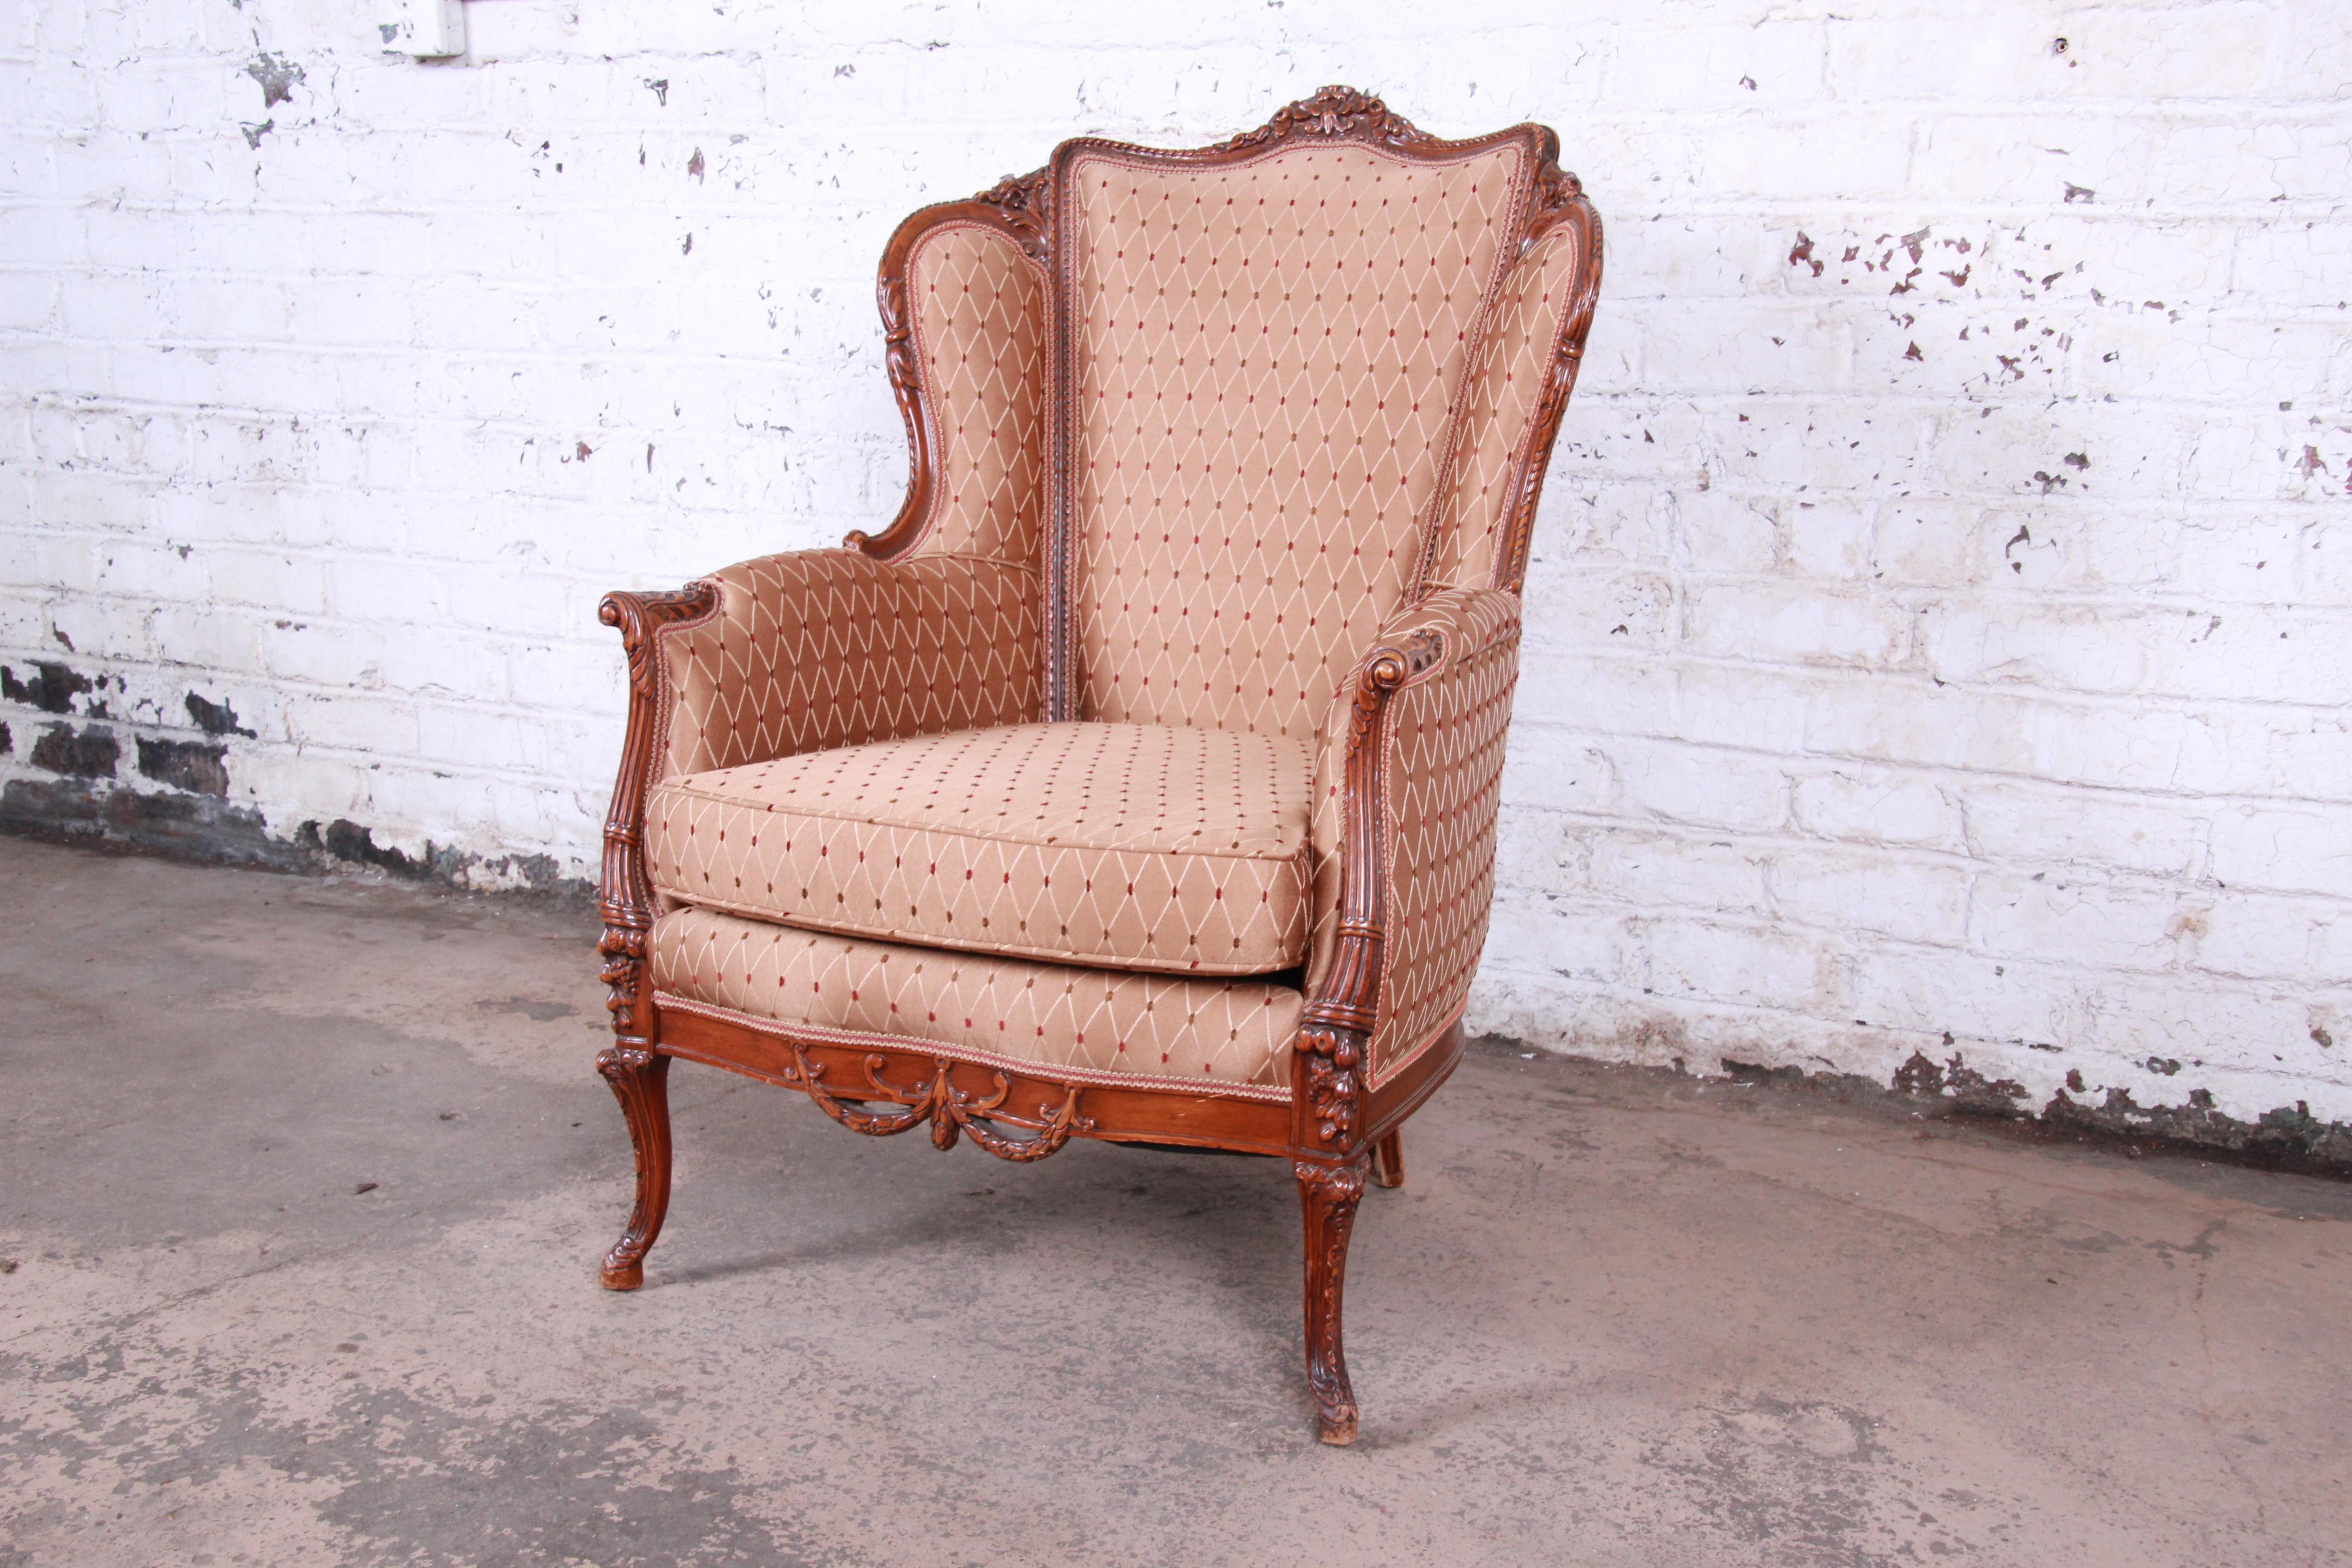 A gorgeous antique French carved wingback lounge chair, circa 1930s. The chair features a solid walnut frame with beautiful carved wood details. It has clean light brown upholstery with a diamond pattern in ivory with red accents. A very stylish and